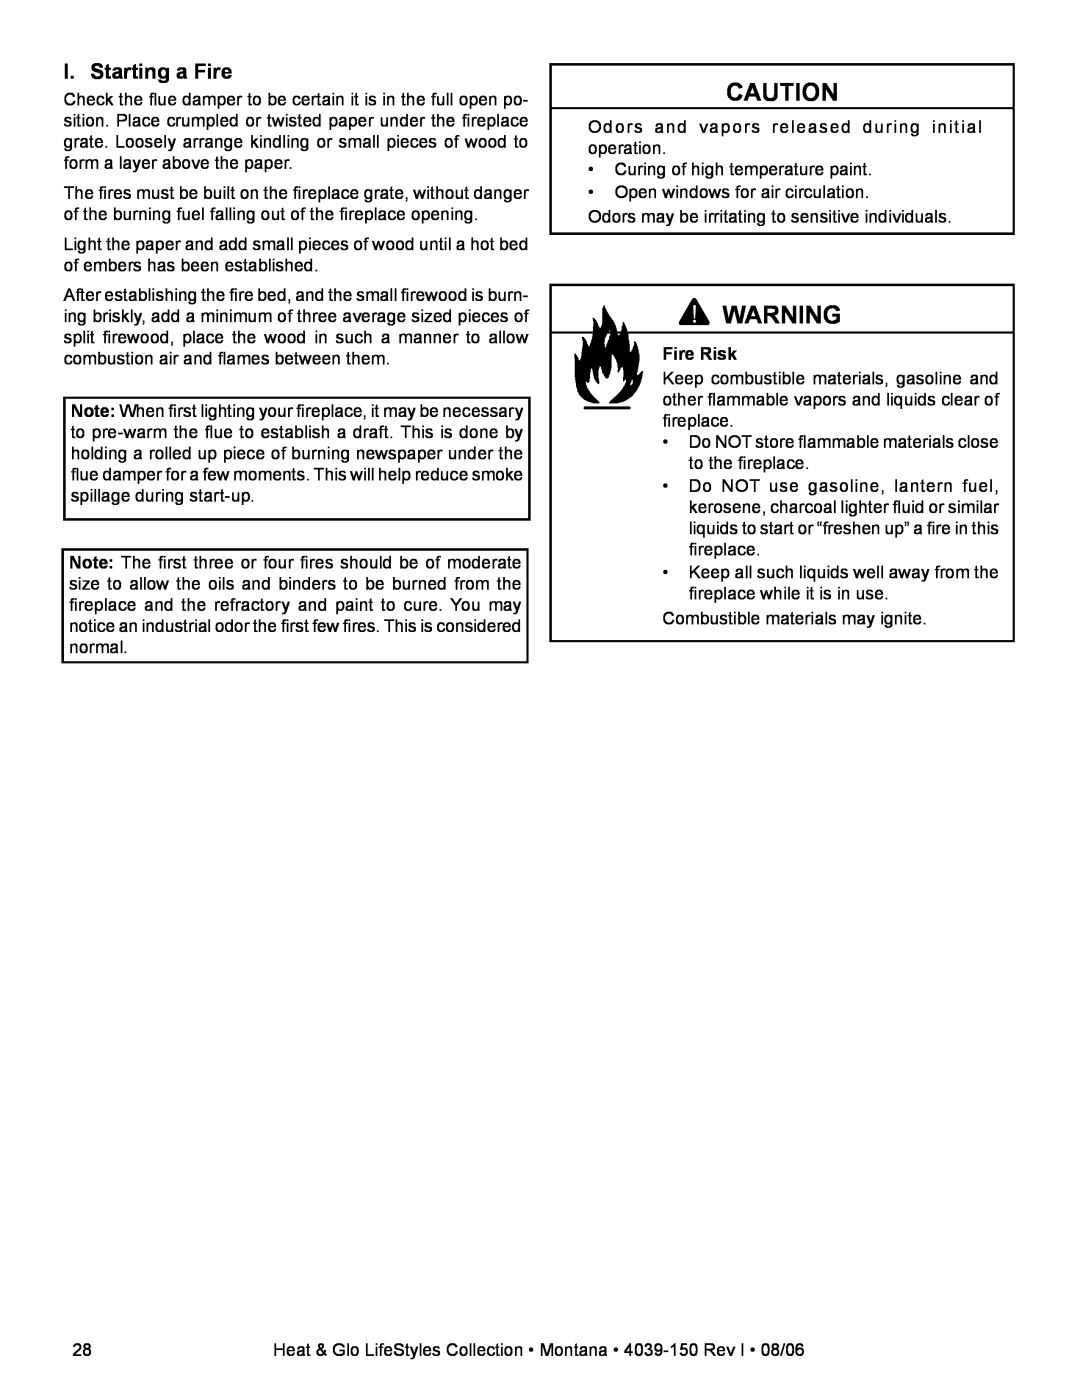 Heat & Glo LifeStyle Montana-42, Montana-36 owner manual I. Starting a Fire, Fire Risk 